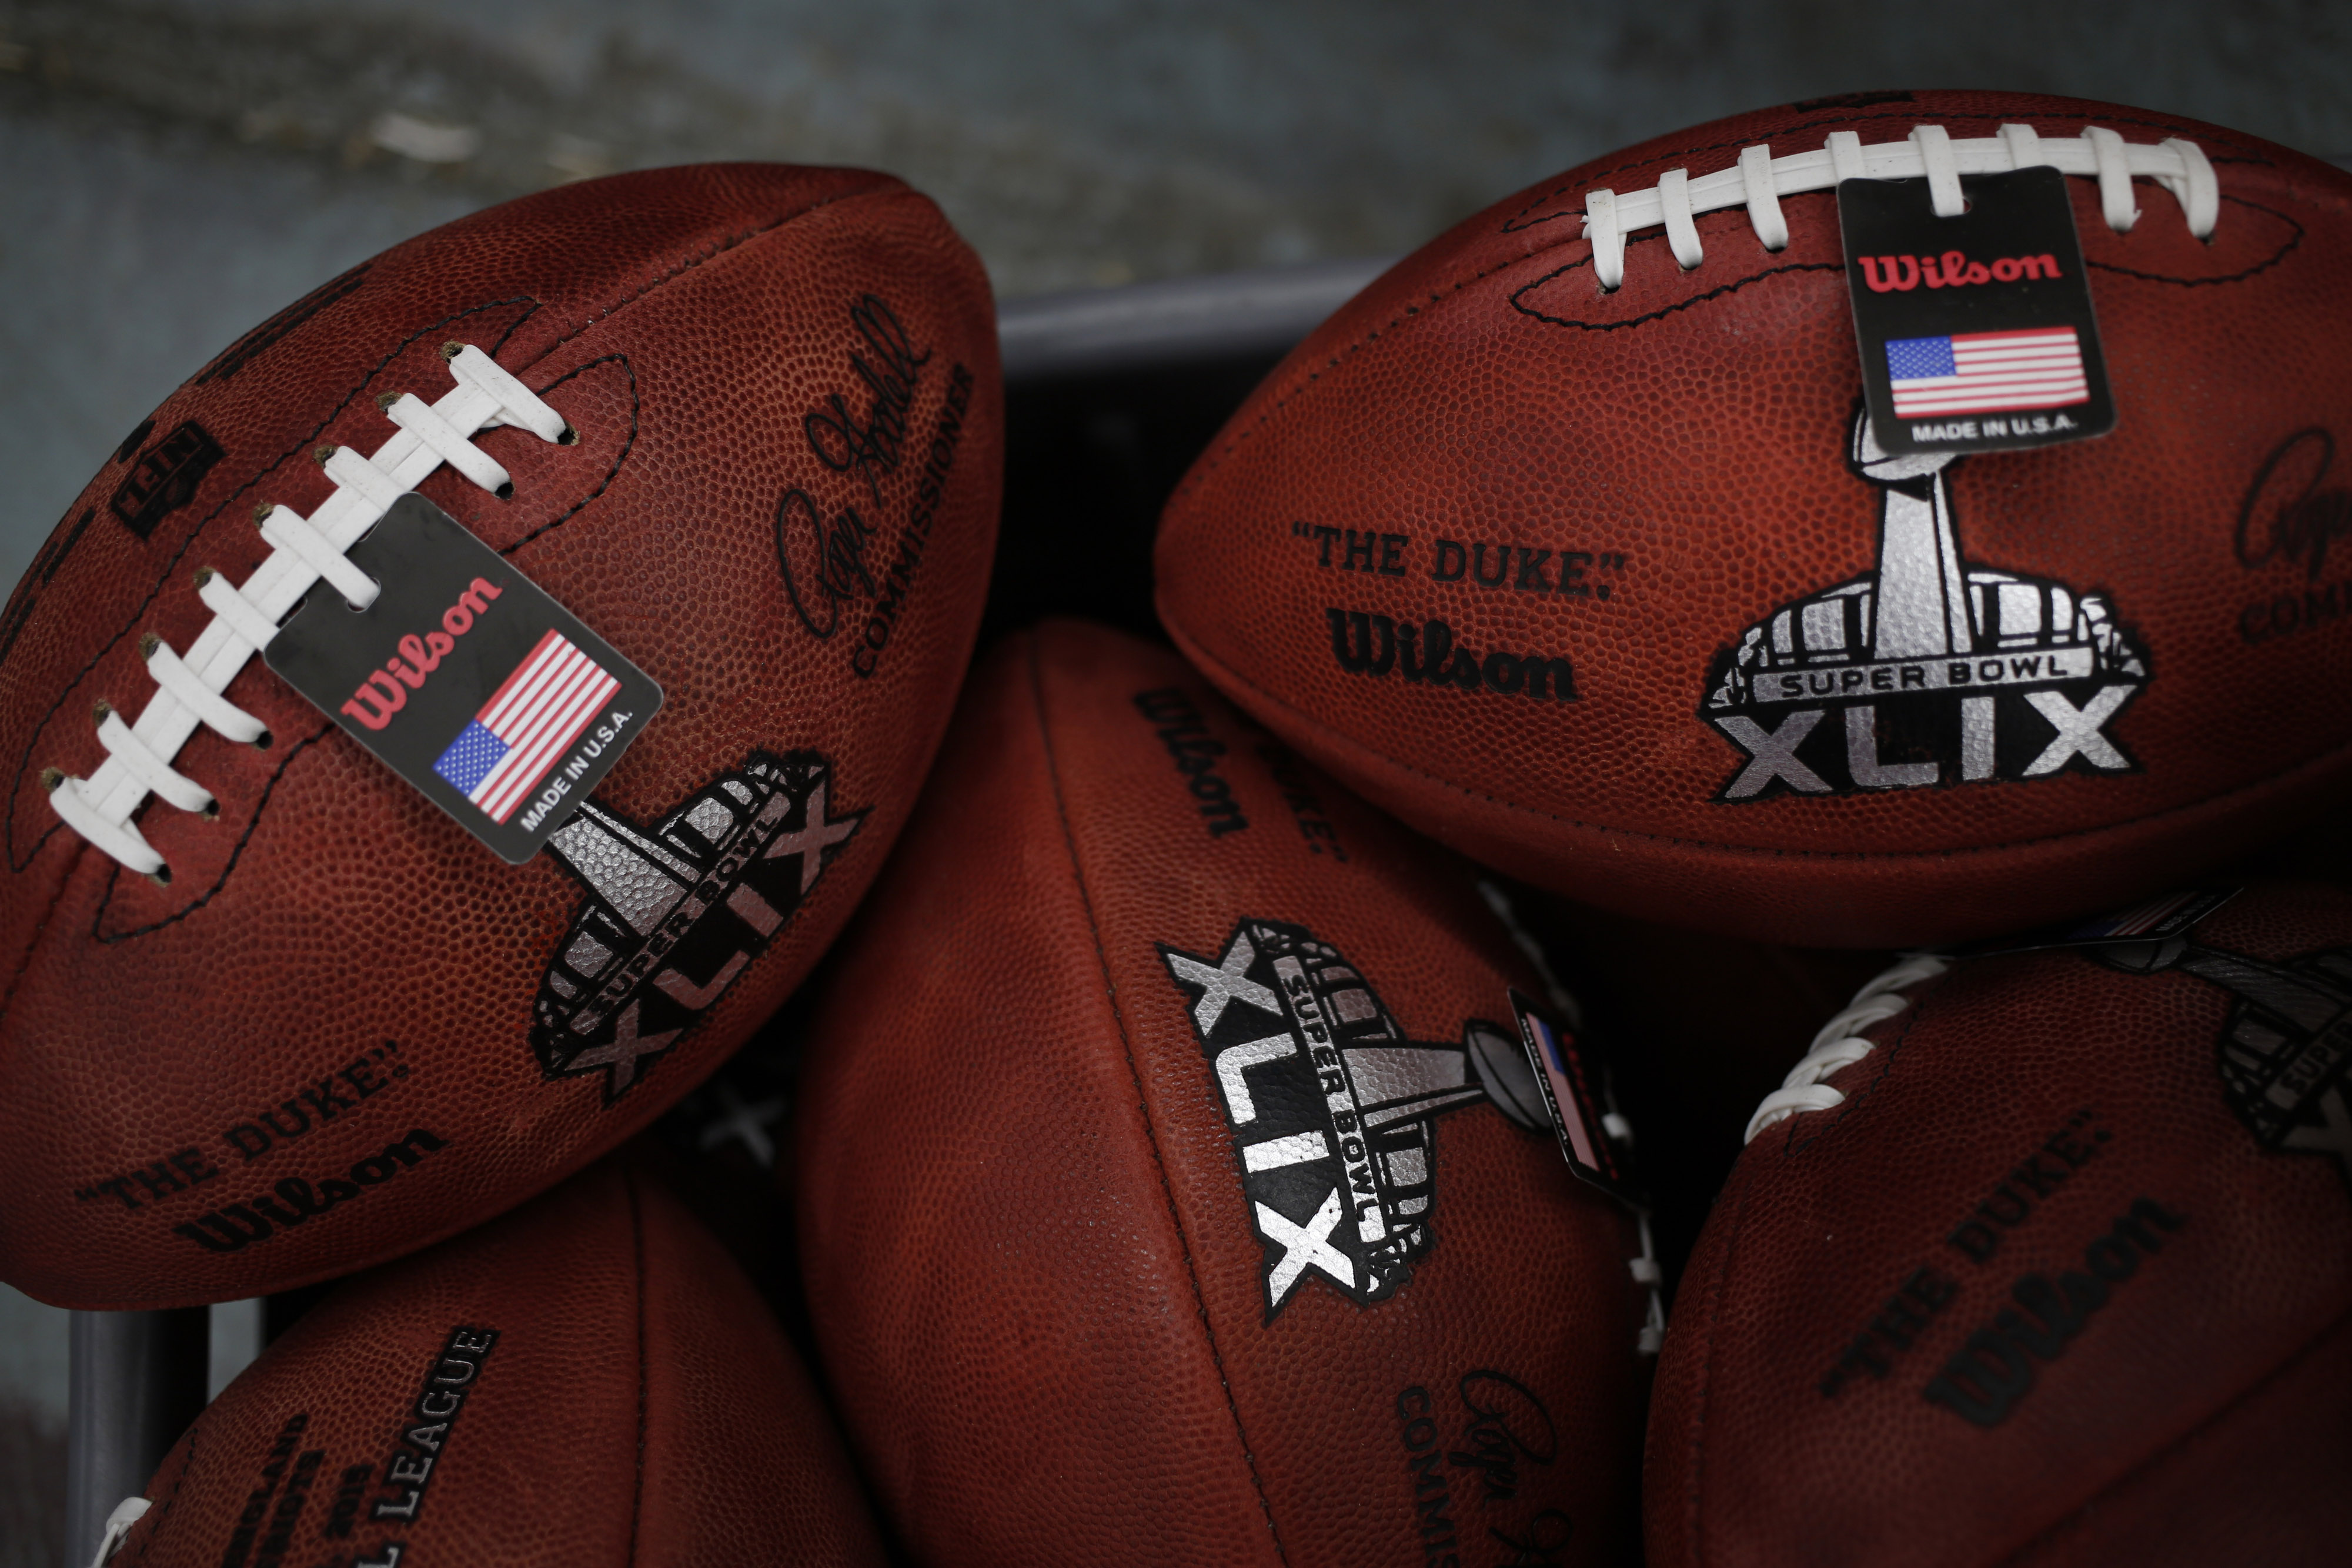 Operations At The Wilson Sporting Goods Co. Football Manufacturing Facility Ahead Of Super Bowl XLIX